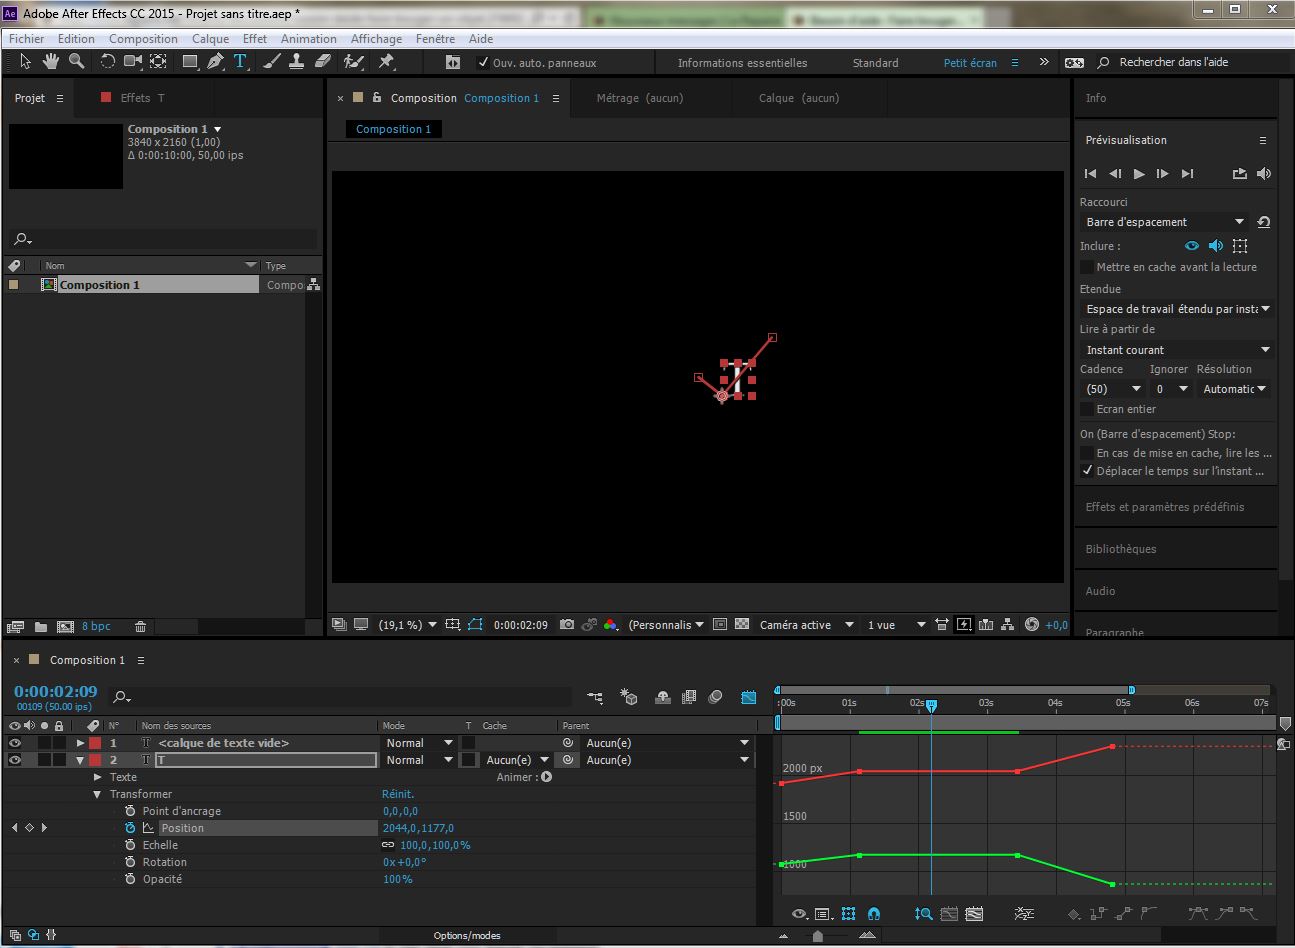 Besoin d'aide : Faire bouger un objet | Adobe After Effects